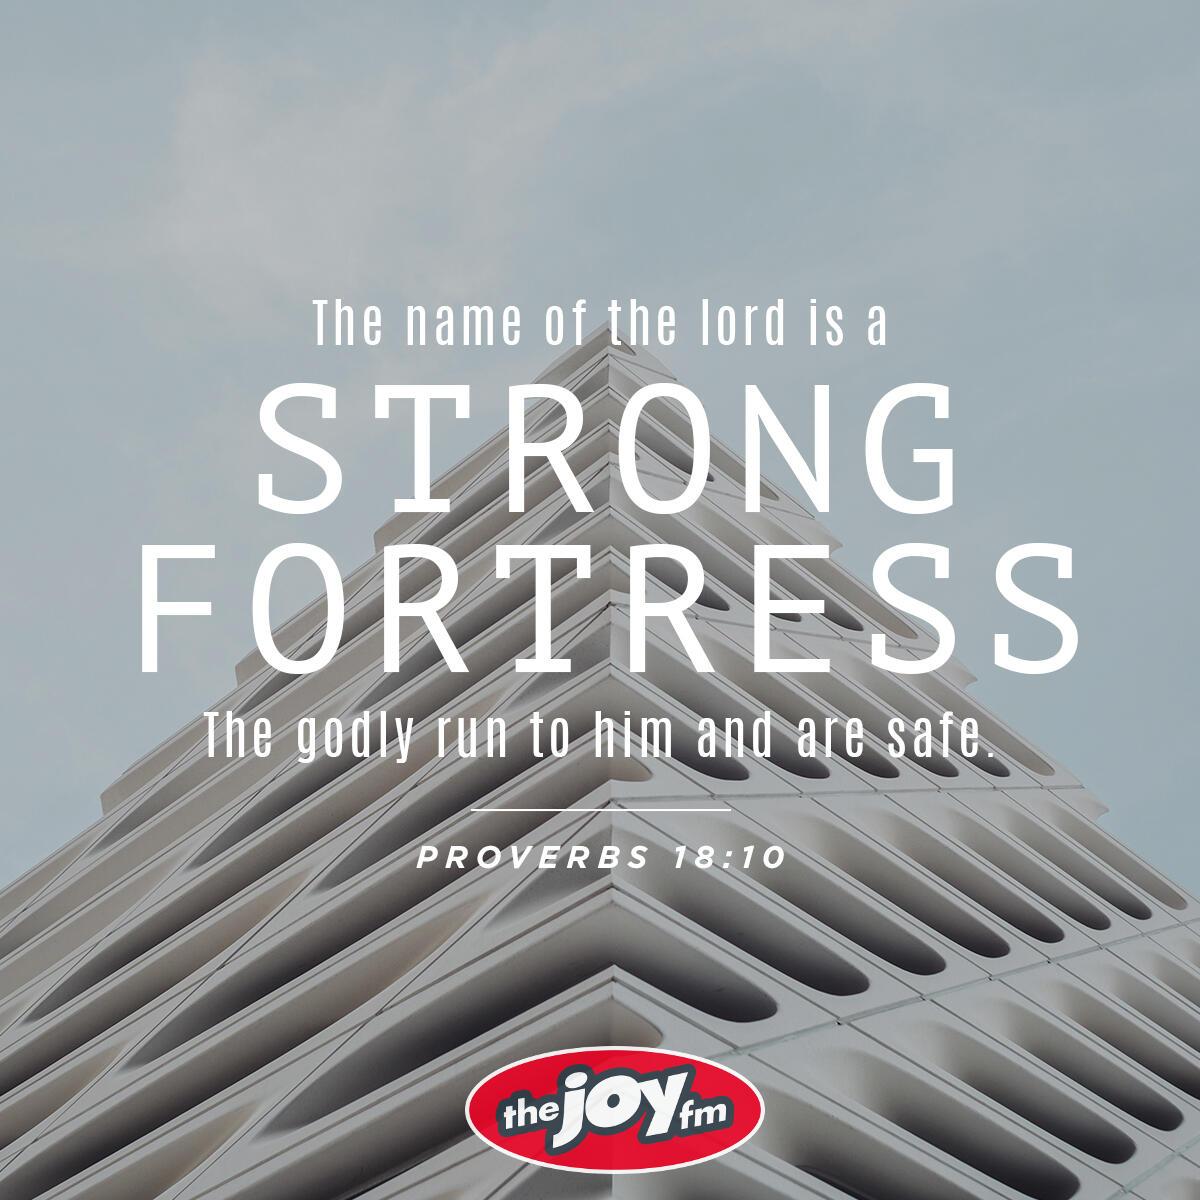 Proverbs 18:10 - Verse of the Day